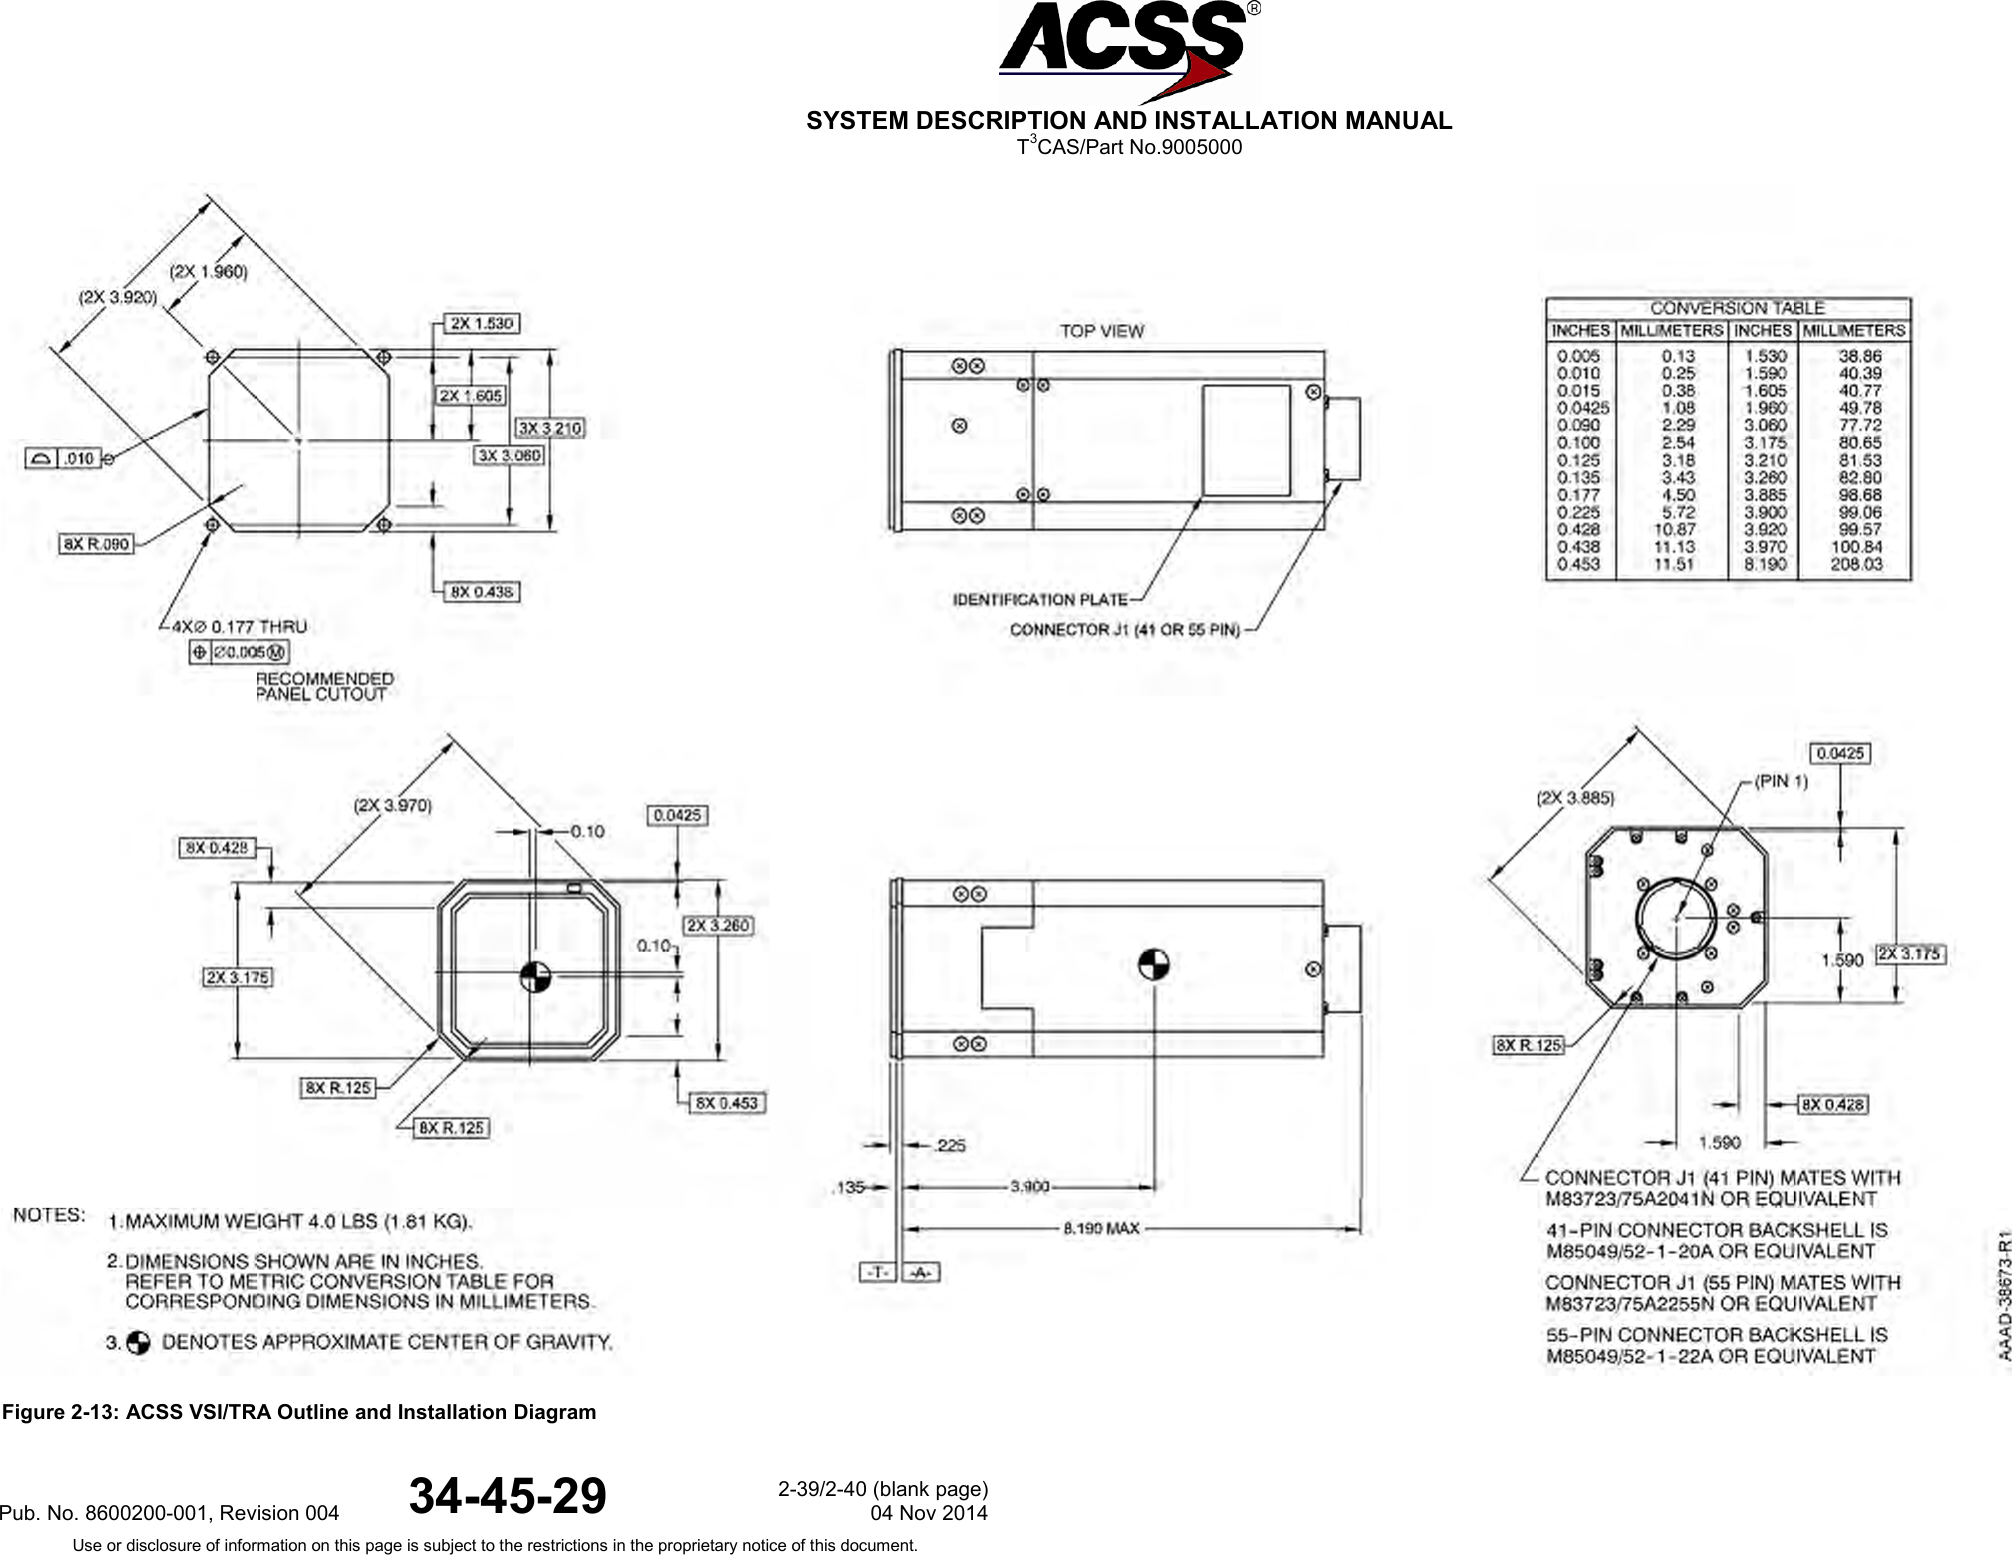  SYSTEM DESCRIPTION AND INSTALLATION MANUAL T3CAS/Part No.9005000  Figure 2-13: ACSS VSI/TRA Outline and Installation Diagram Pub. No. 8600200-001, Revision 004 34-45-29 2-39/2-40 (blank page) 04 Nov 2014 Use or disclosure of information on this page is subject to the restrictions in the proprietary notice of this document.  